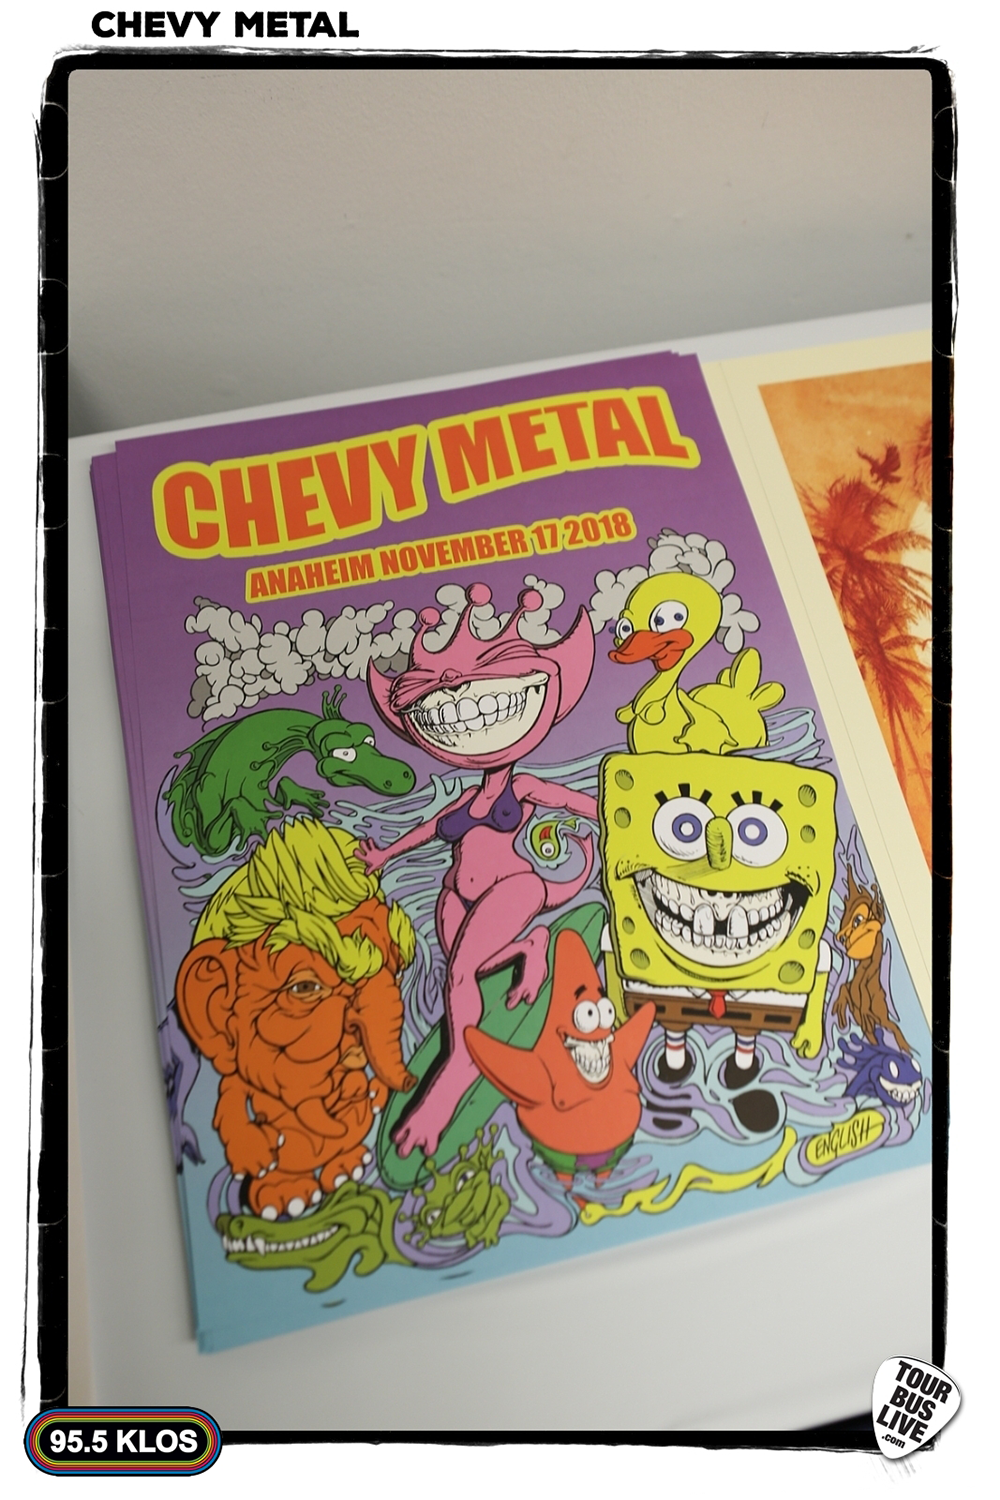 CHEVY-METAL_185